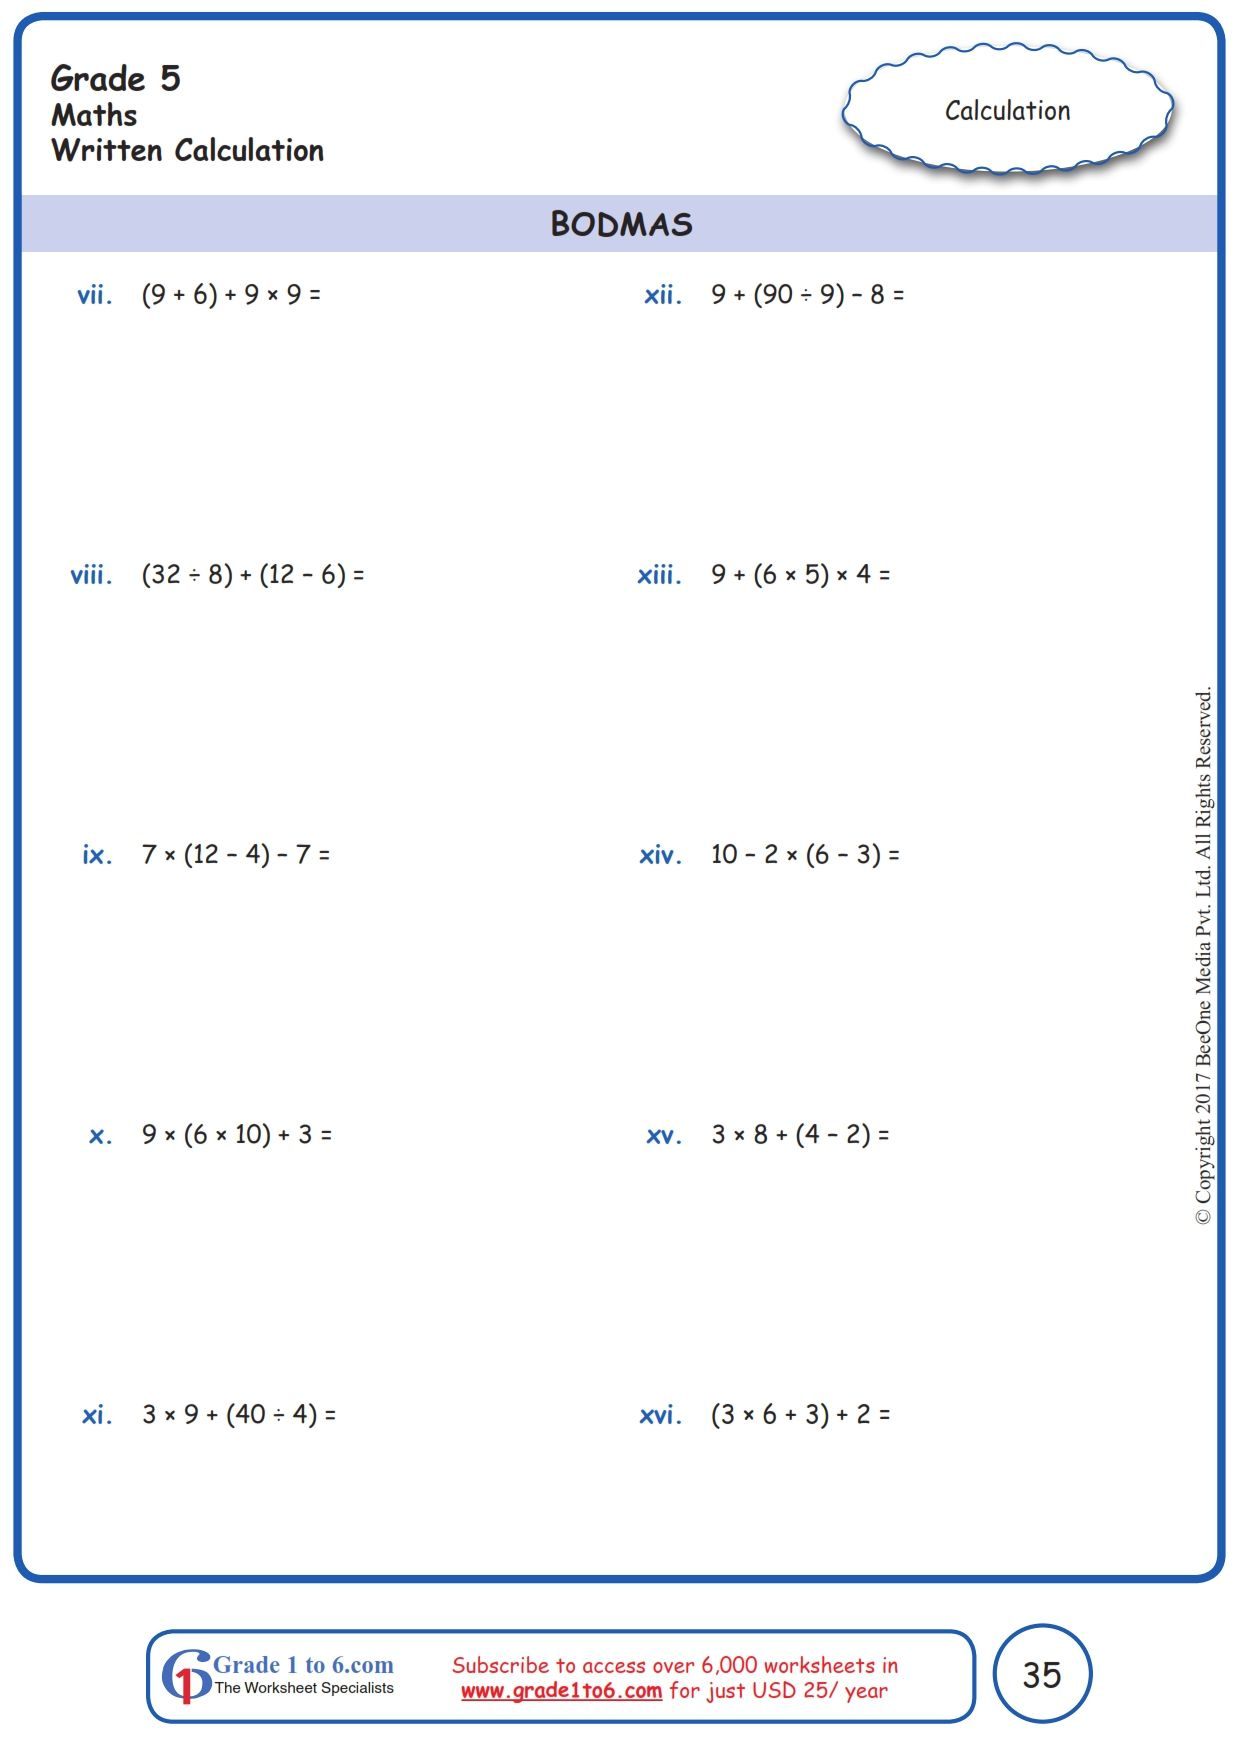 Grade 5 Class 5 Order Of Operation Worksheets Math Fact Worksheets 